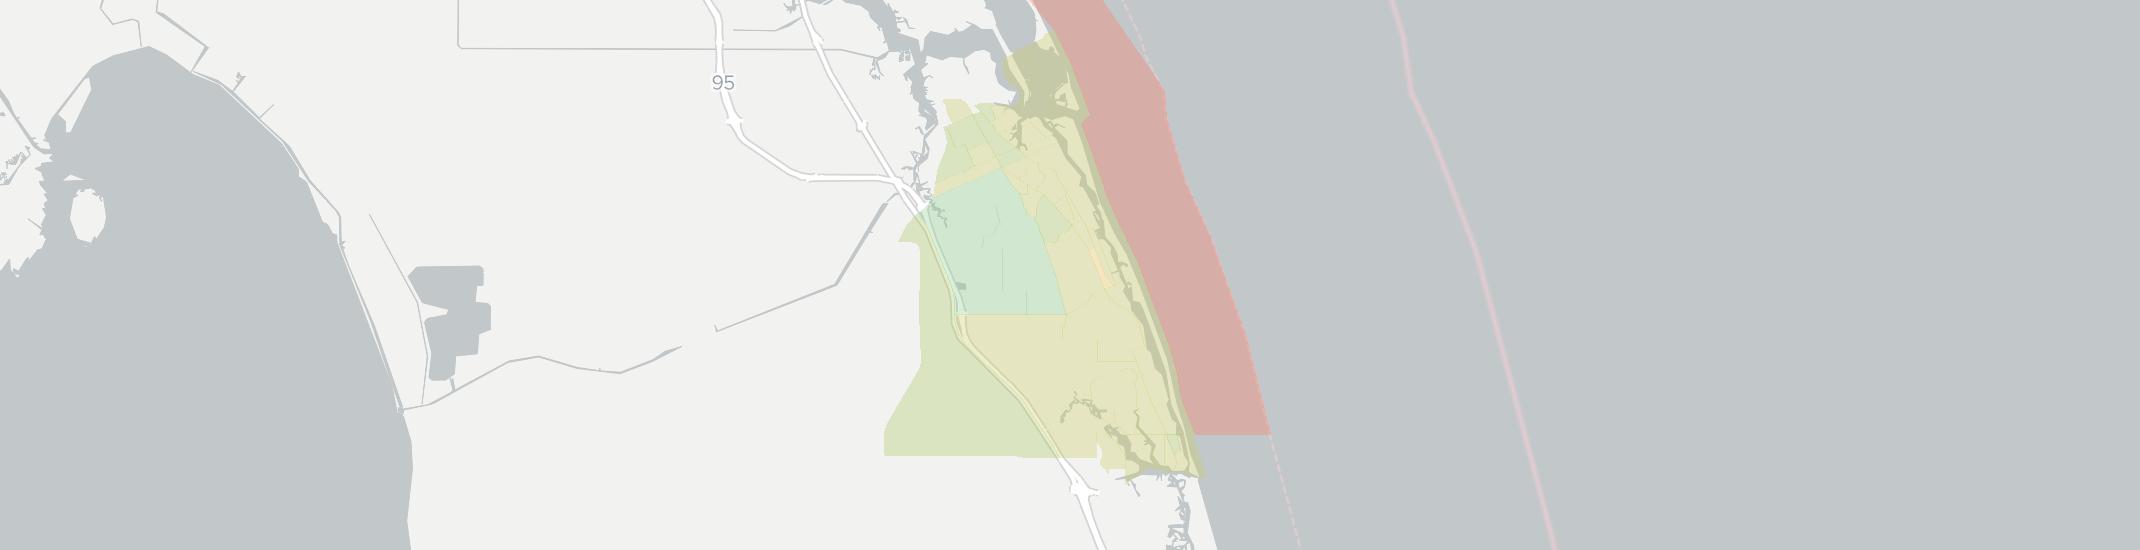 Hobe Sound Internet Competition Map. Click for interactive map.